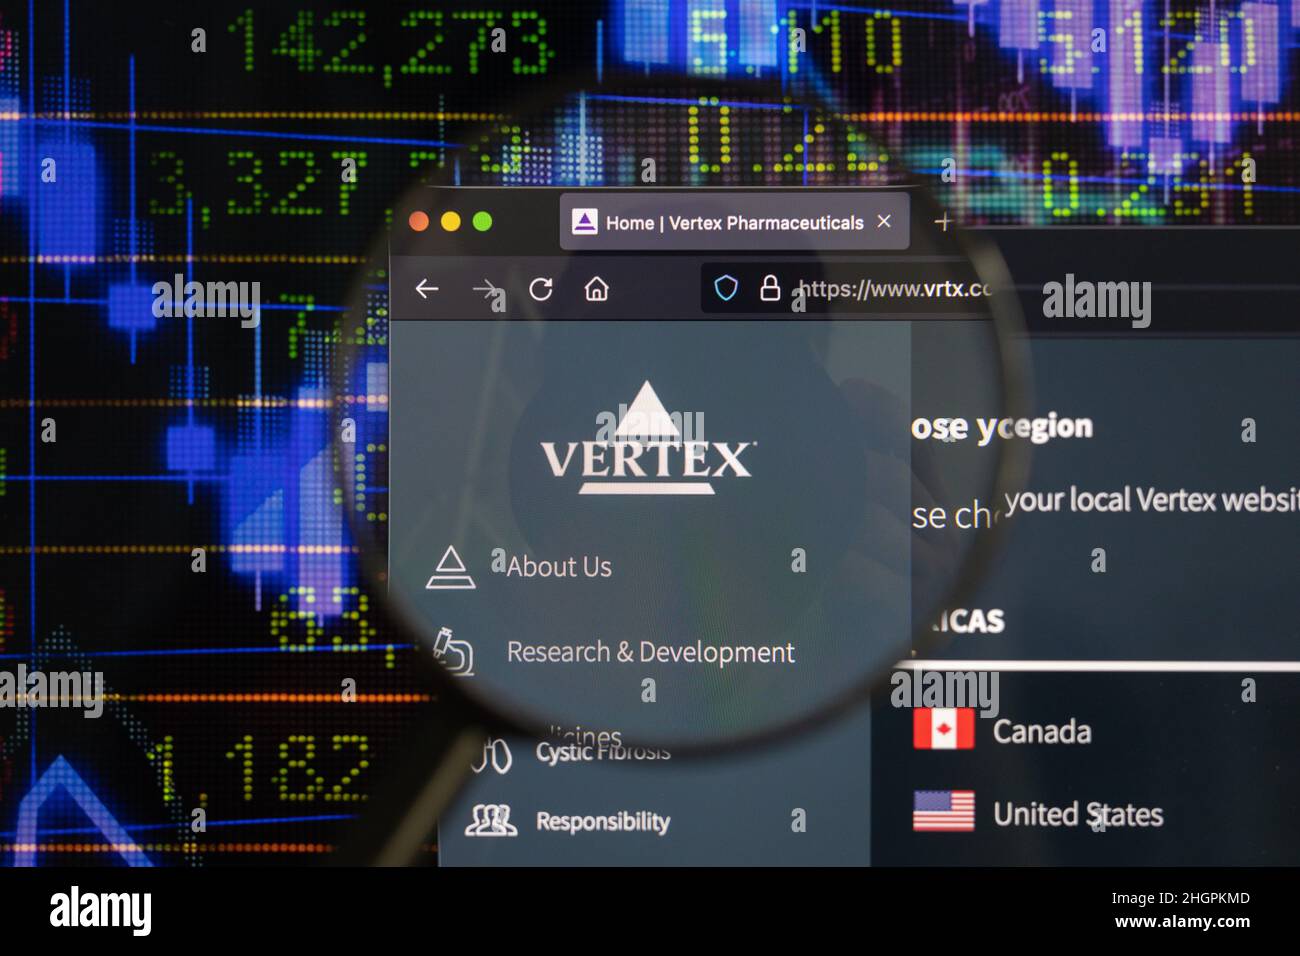 Vertex company logo on a website with blurry stock market developments in the background, seen on a computer screen through a magnifying glass. Stock Photo